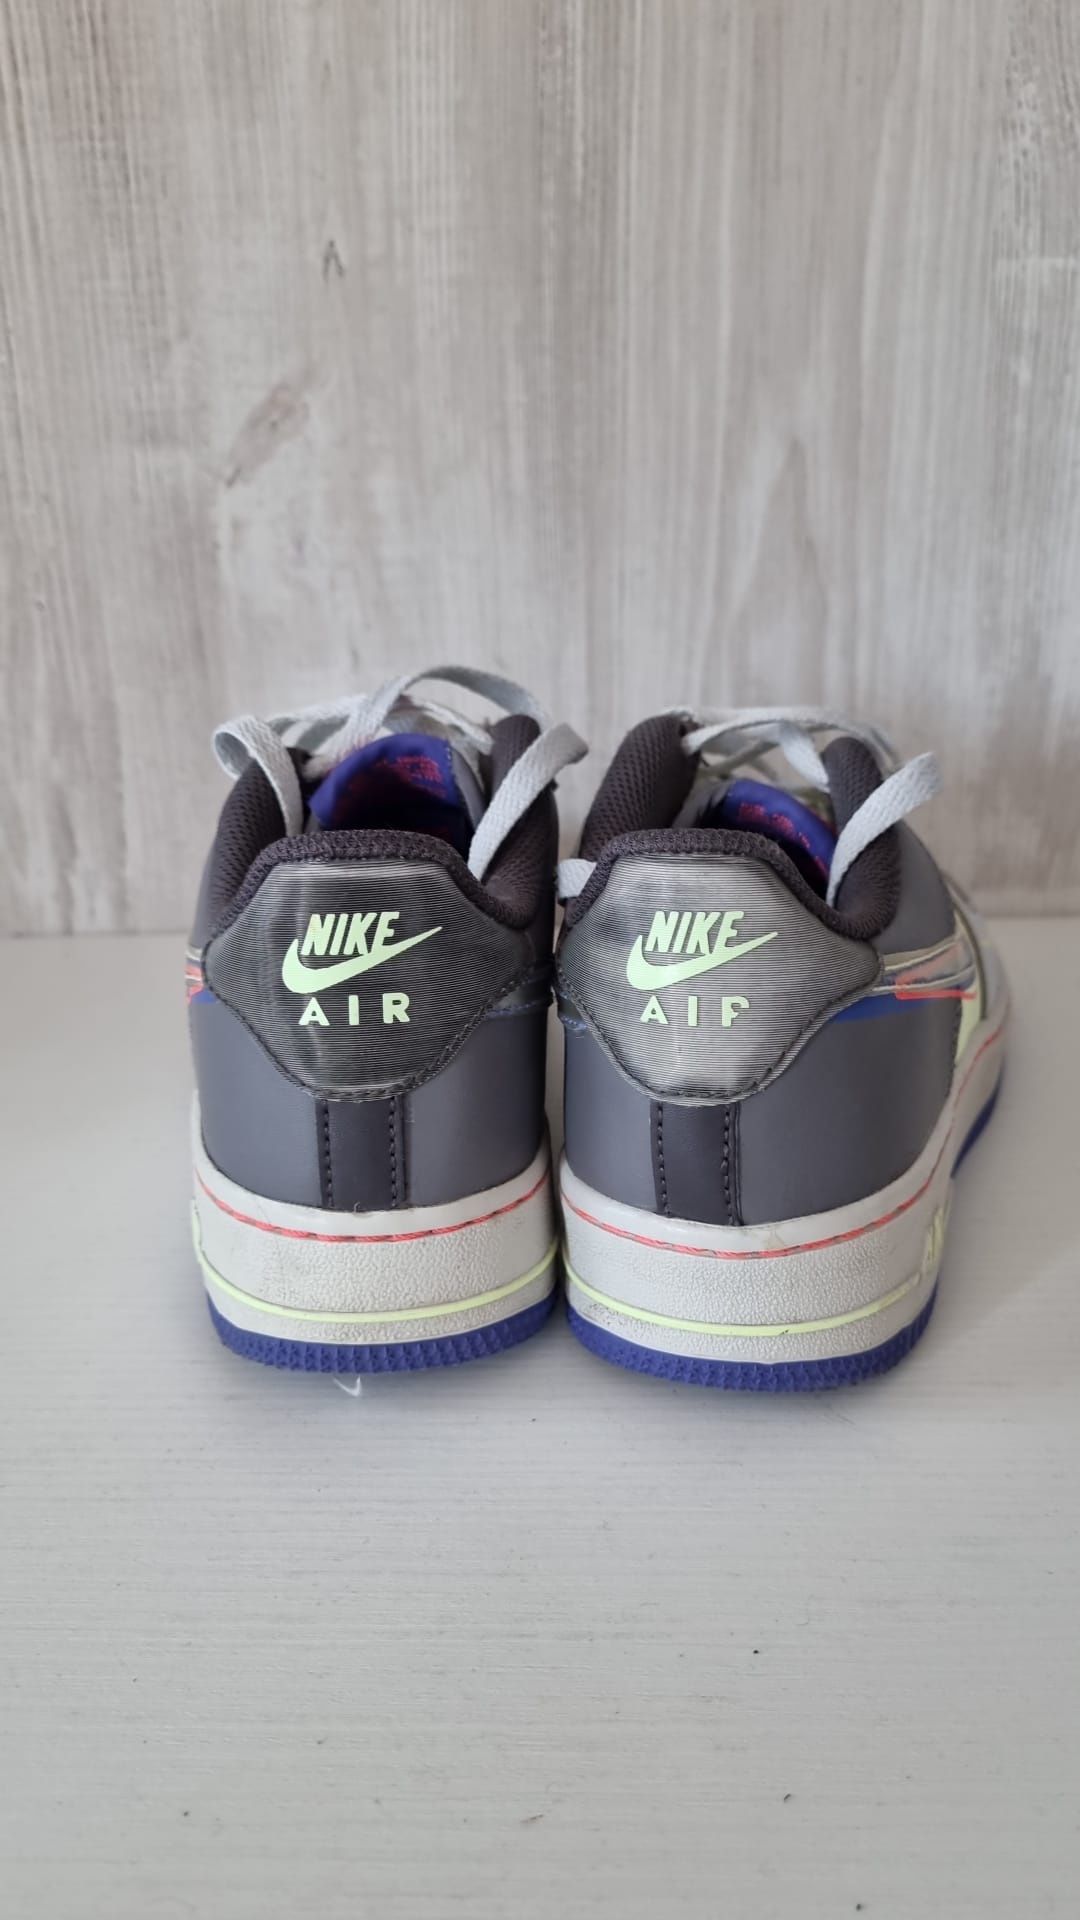 Nike Air Force 1 Low Dunk It marime 37.5